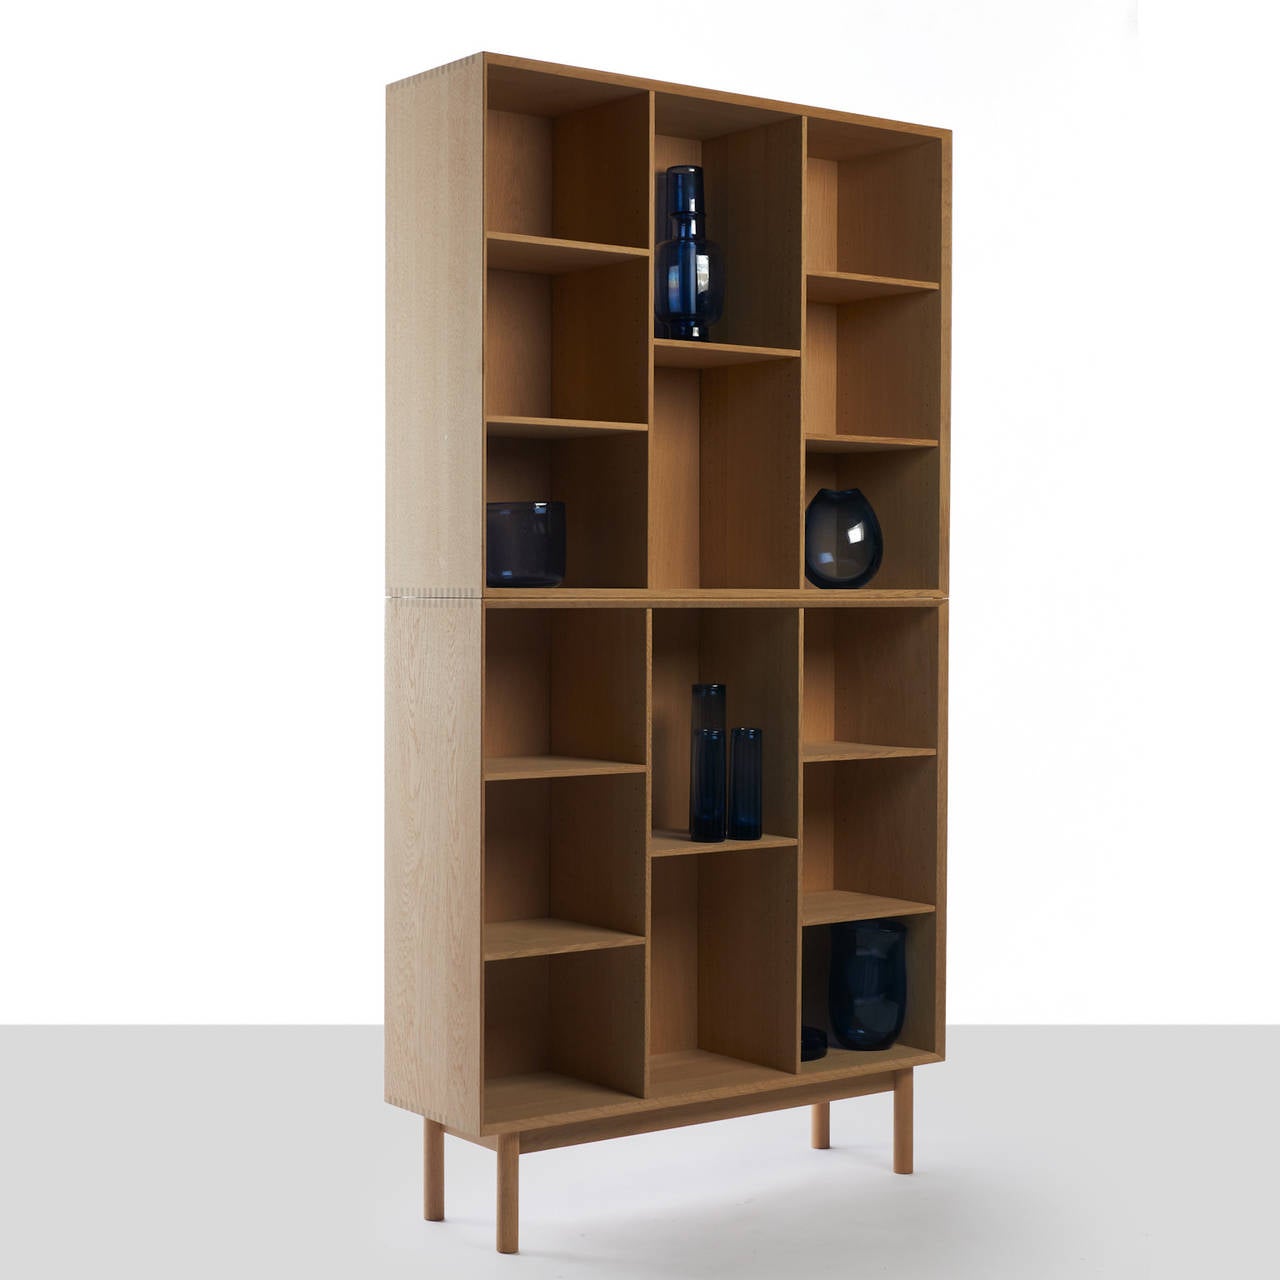 A tall bookcase shown in oak with a soaped finish. Exposed
finger joints and adjustable shelves. Available in teak, oak, mahogany and pine.
Six stacking units shown, side by side, units sold separately. Designed by Peter Hvidt produced by Søborg